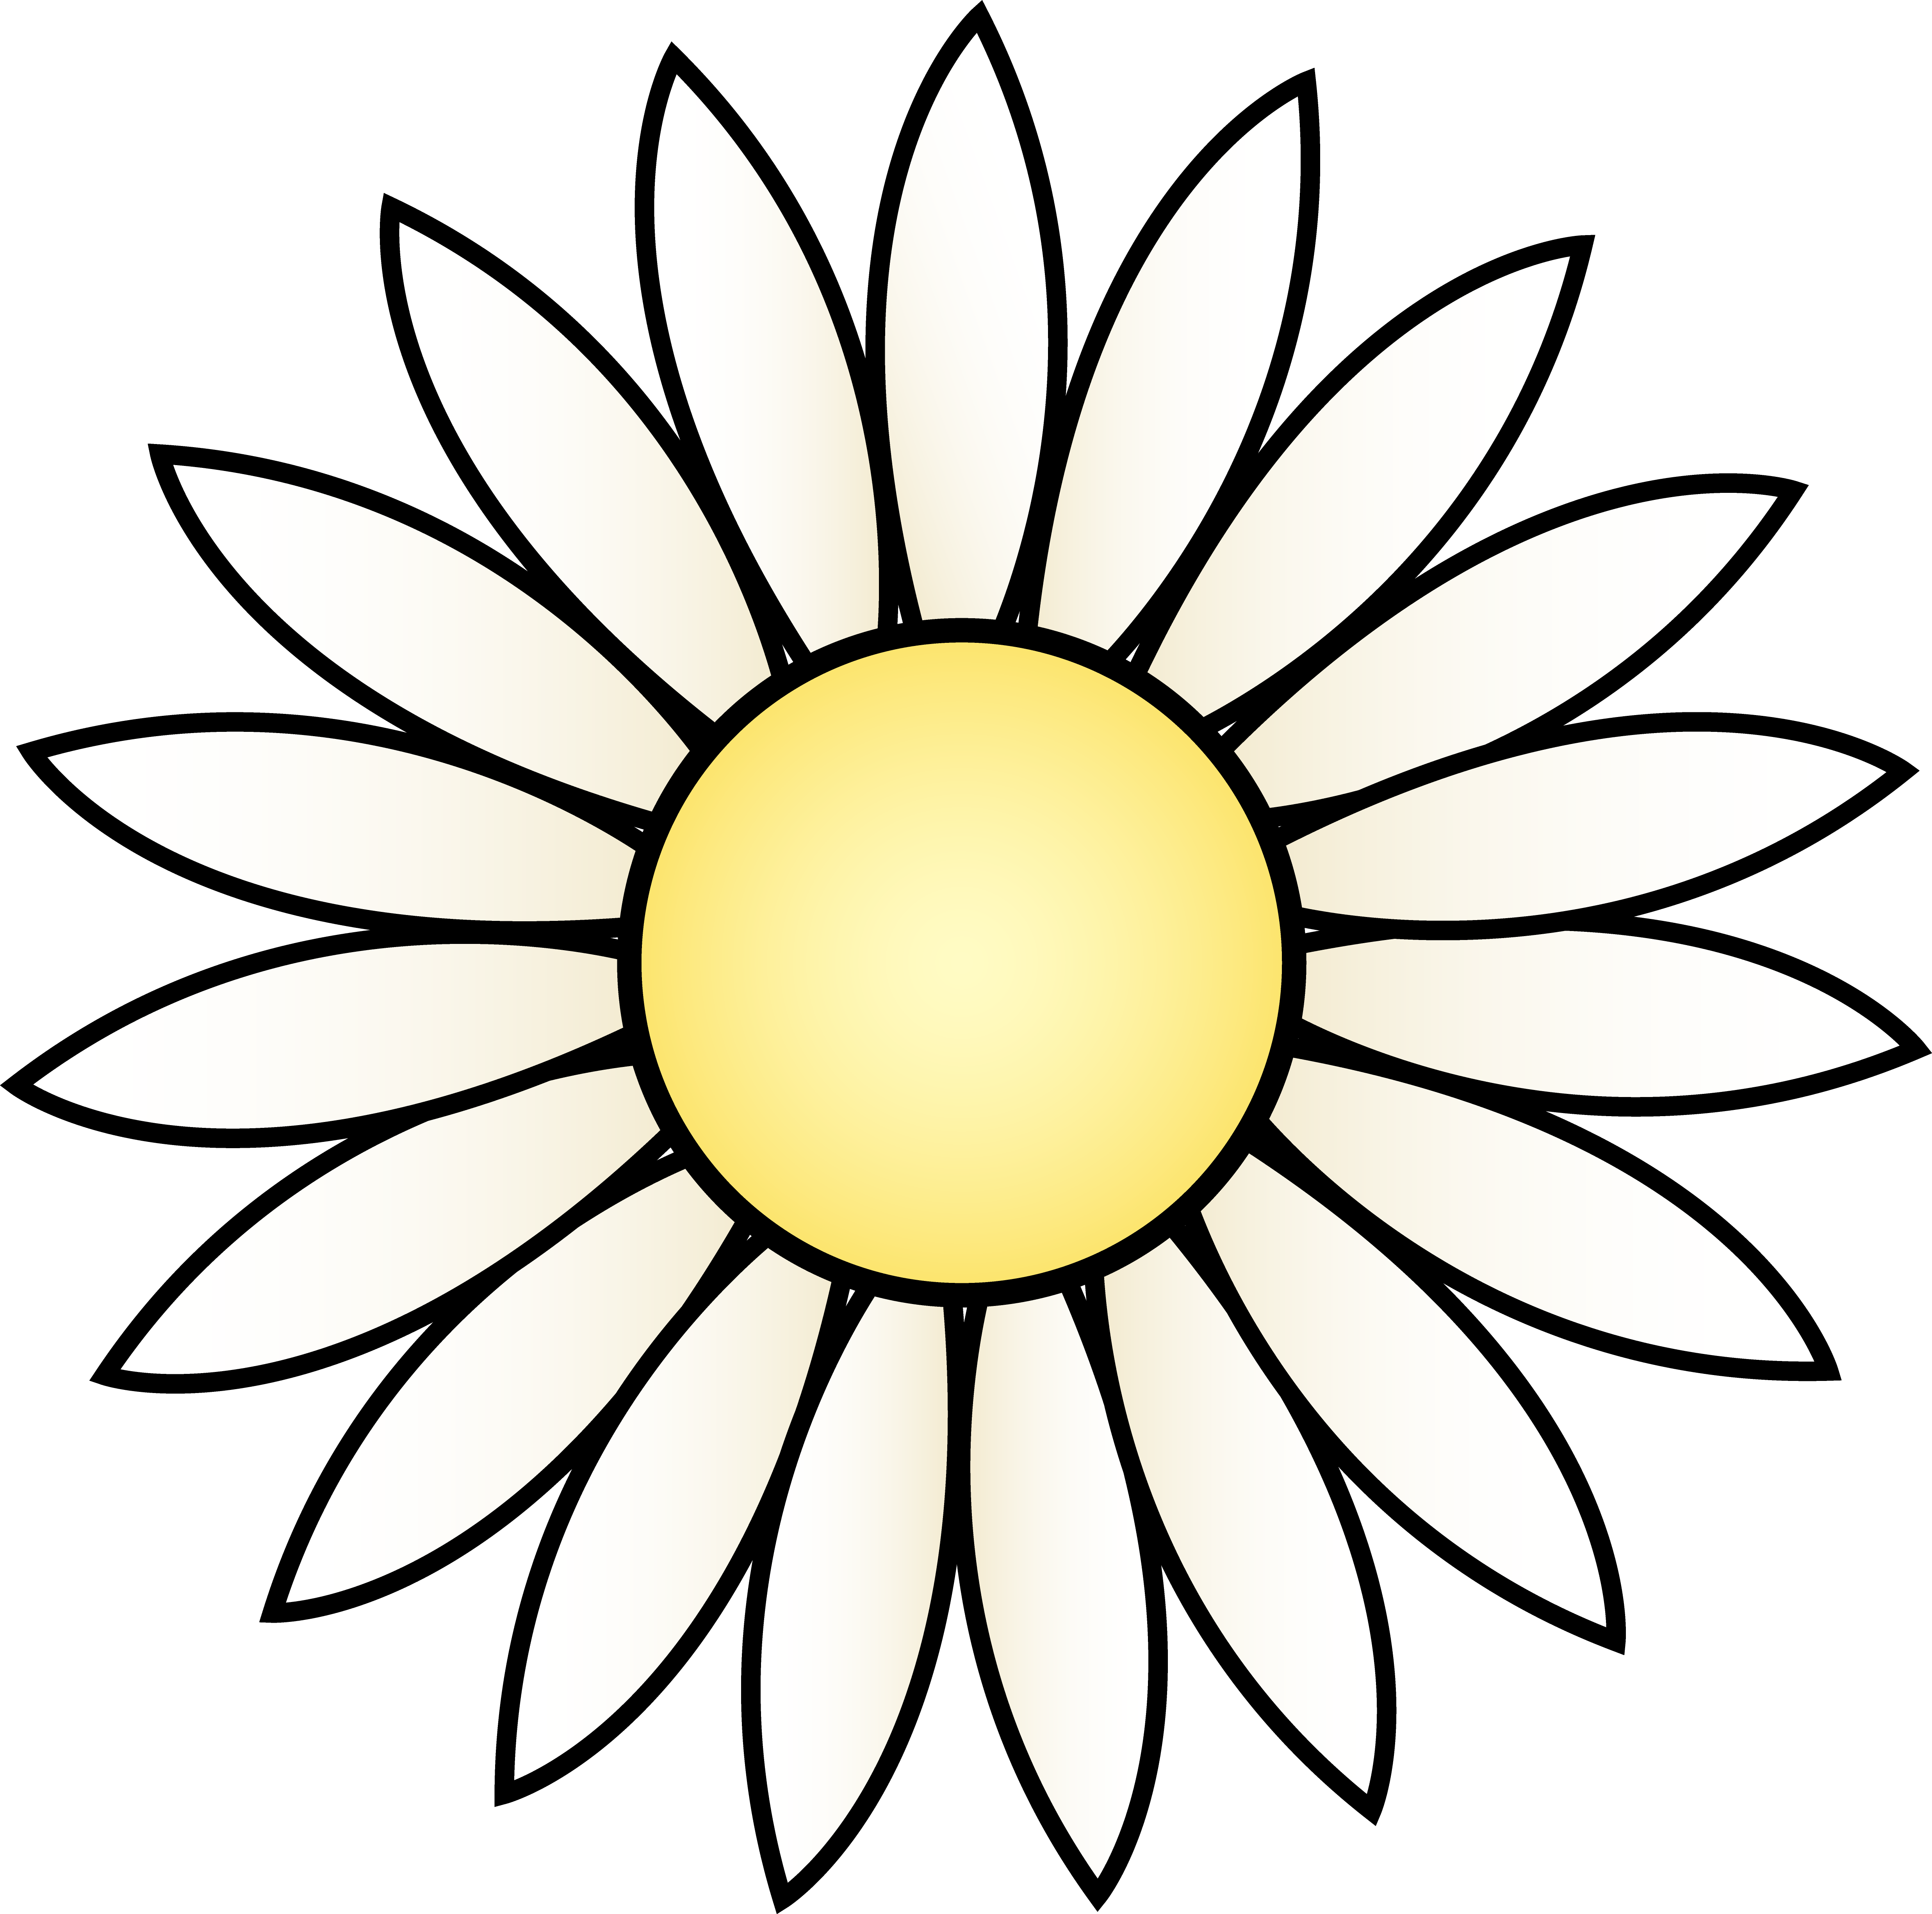 White Daisy with Yellow